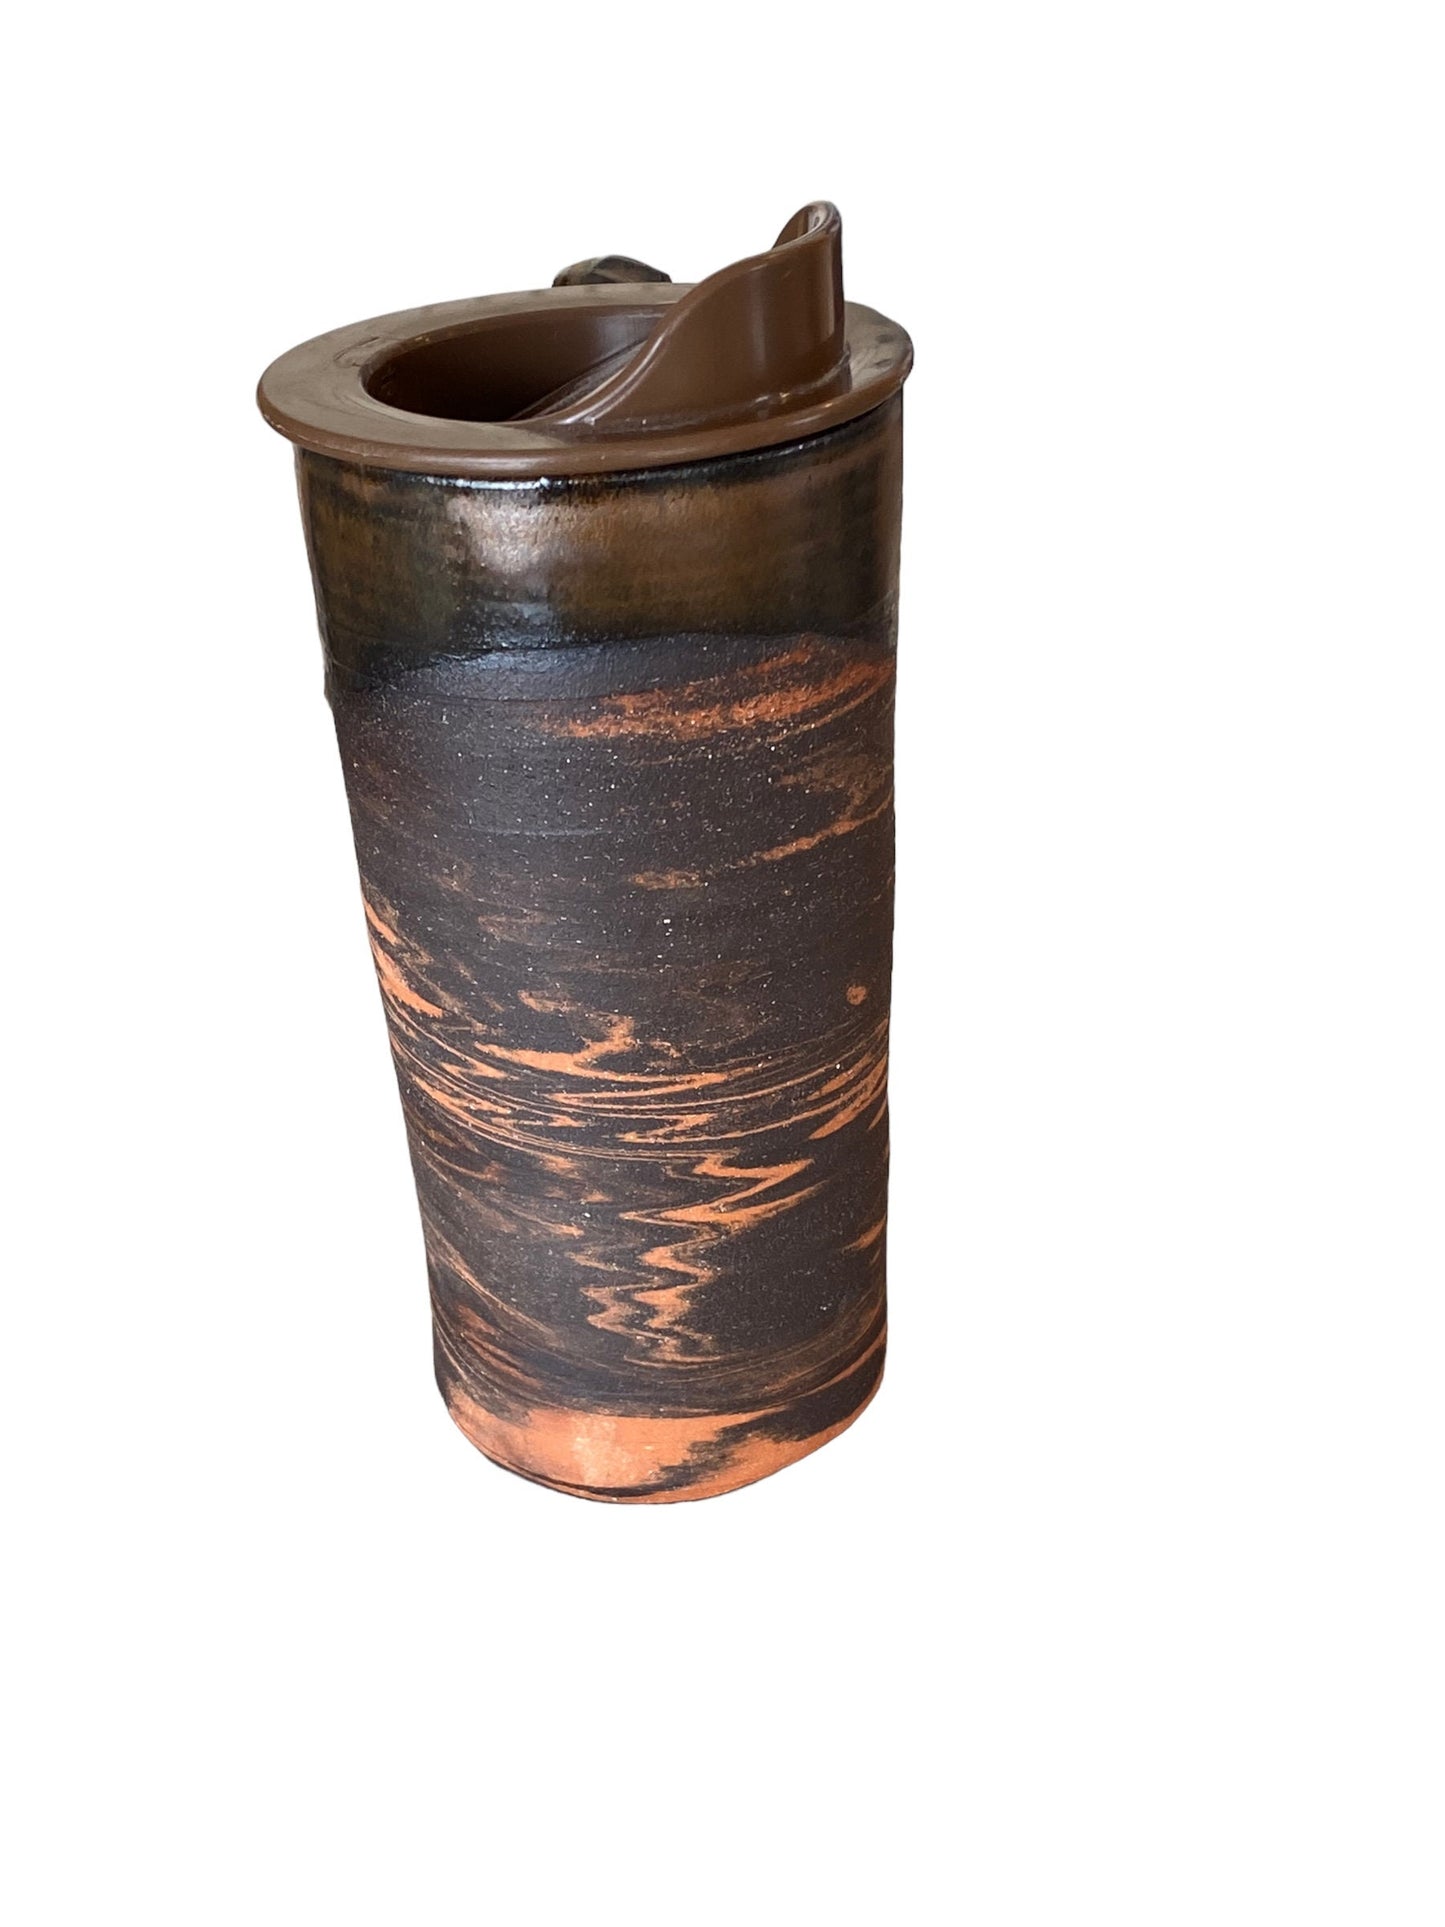 Cinnamon Glazed Agateware Handmade 16-Ounce Travel Mug - Stylish Pottery with Locking Lid for Your On-the-Go Sips